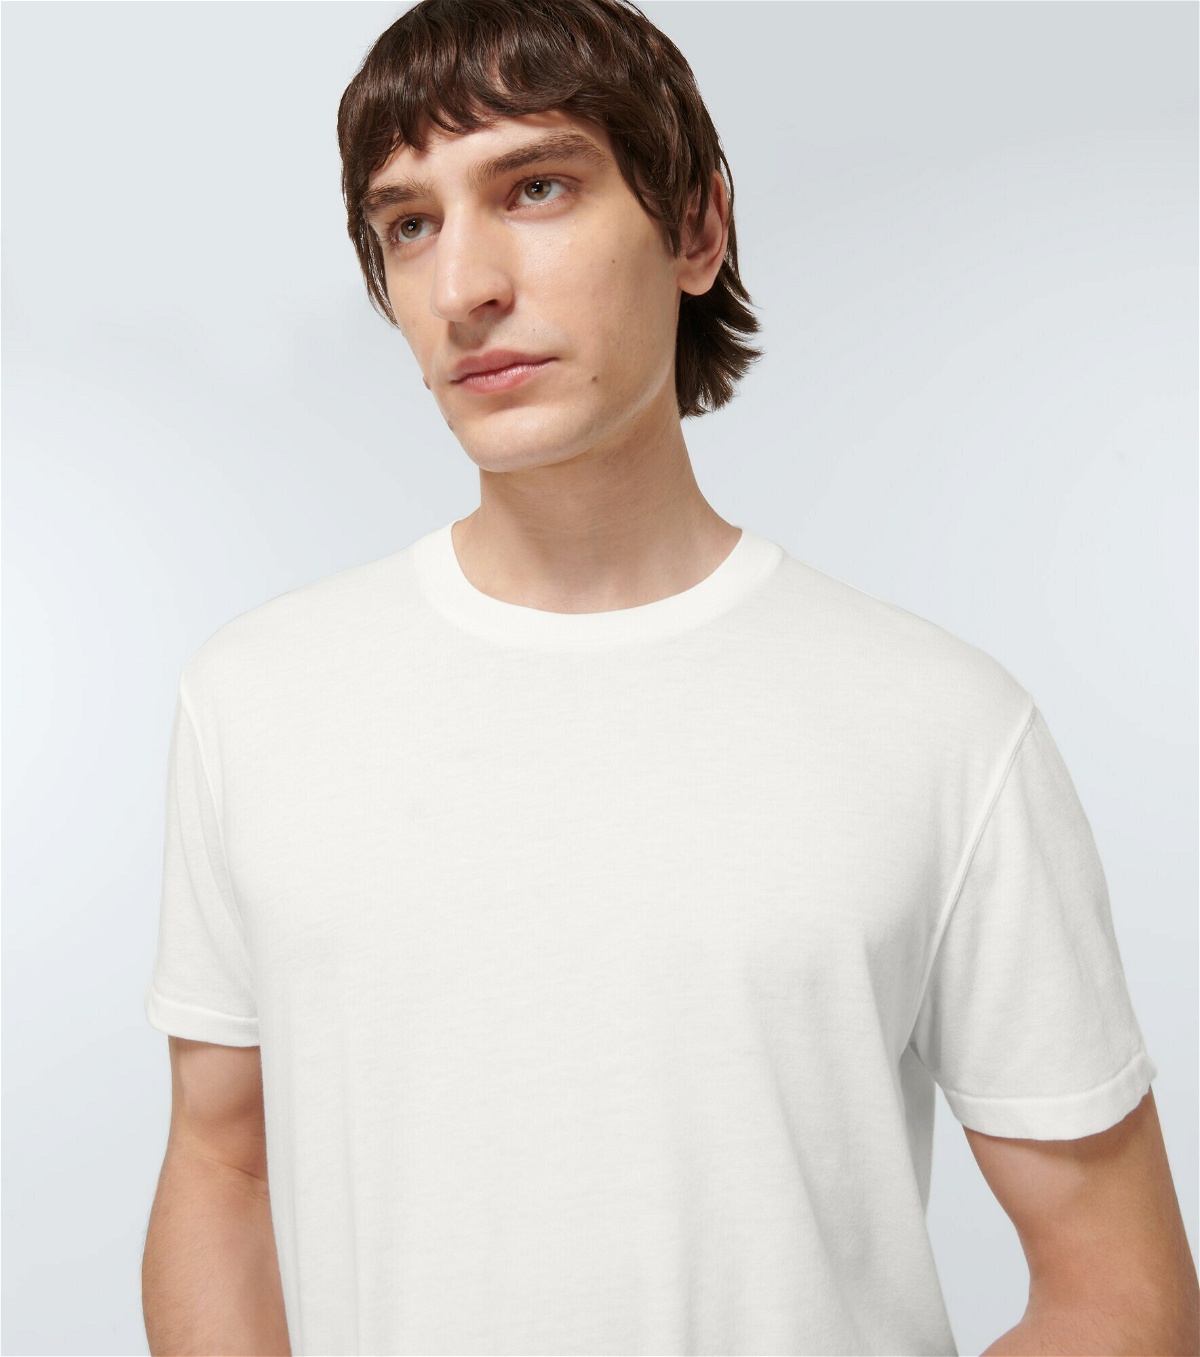 Tom Ford - Cotton-blend jersey T-shirt TOM FORD